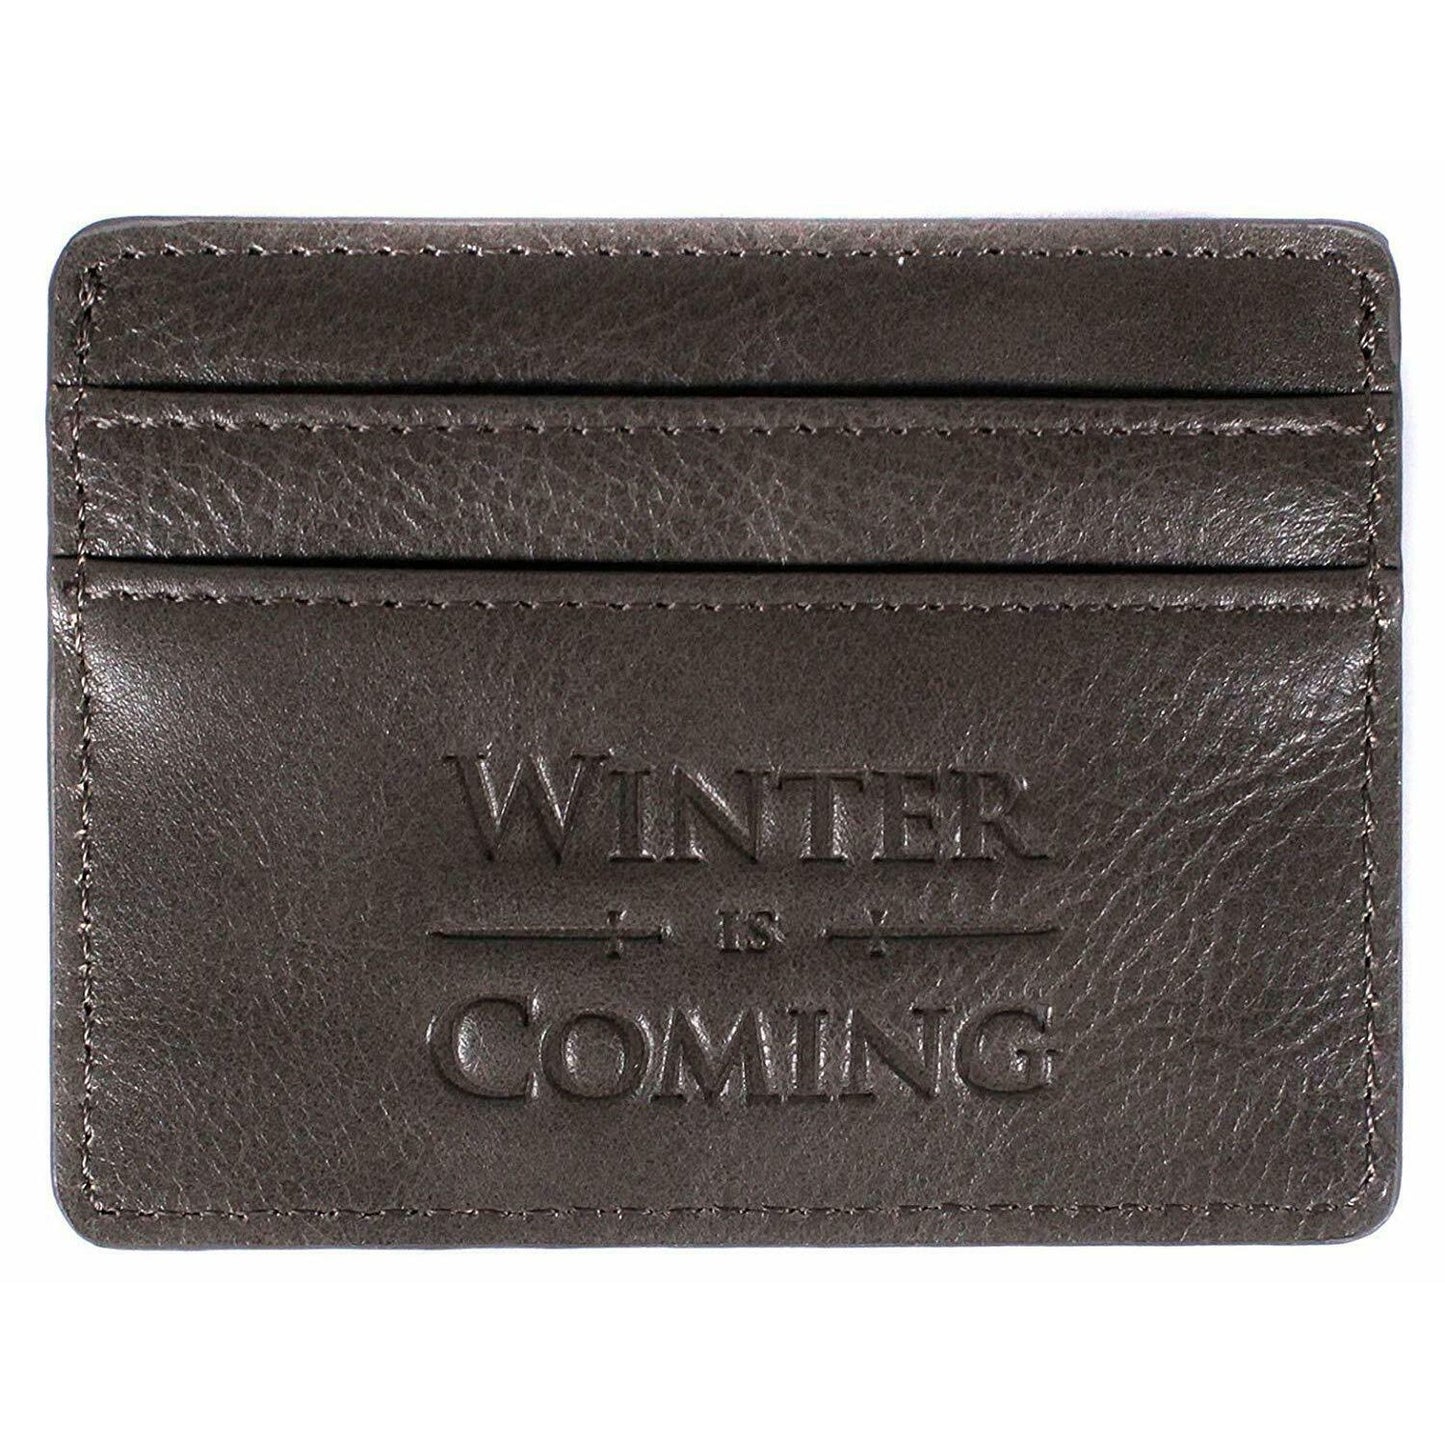 Credit Card Holder - GAME OF THRONES